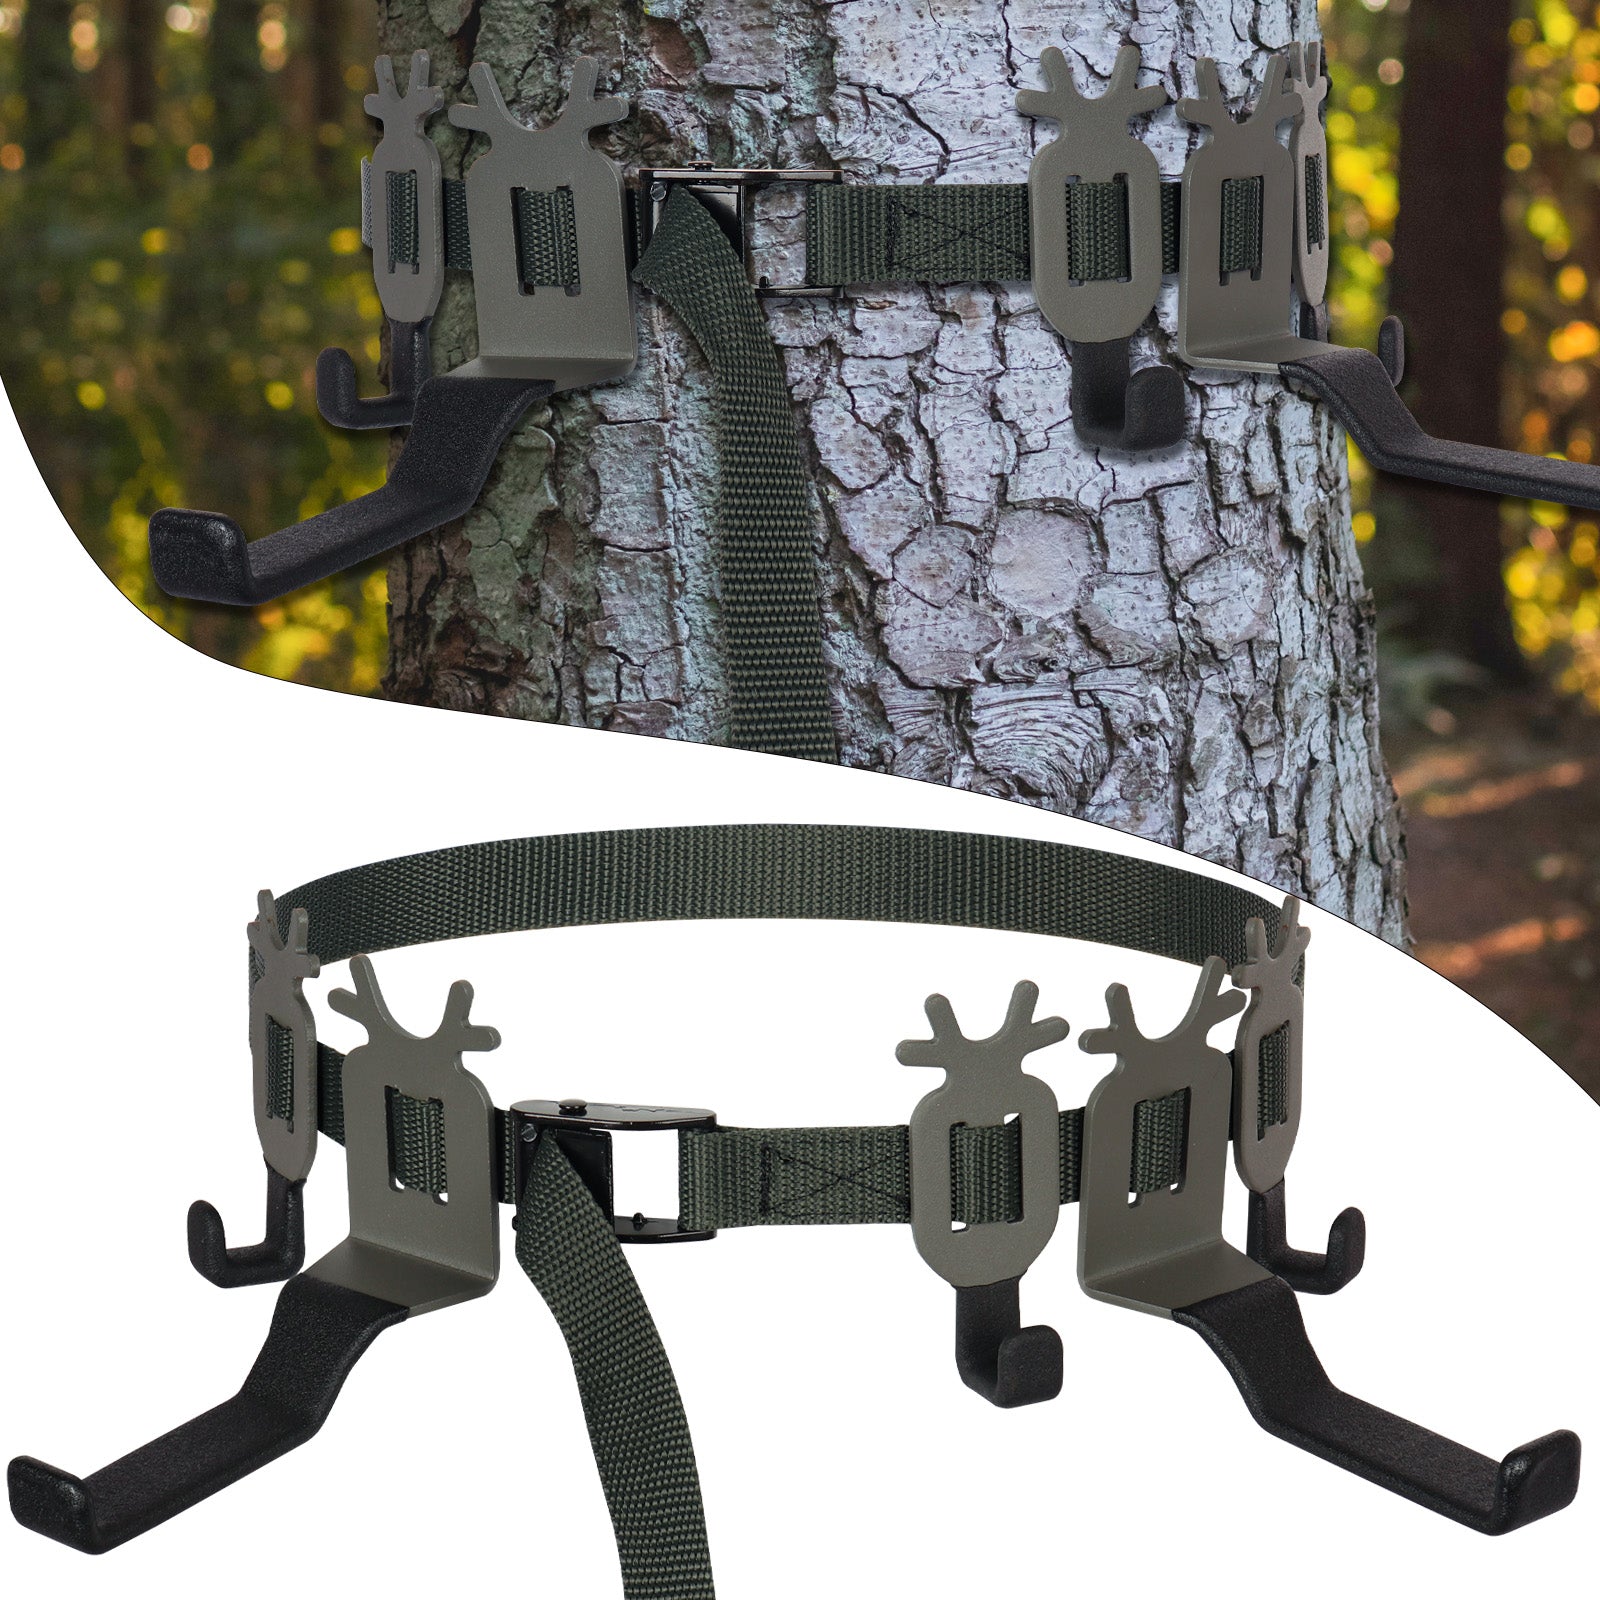 Treestand Strap Gear & Bow Hangers for Hunting Gears Bow - 3 Gear